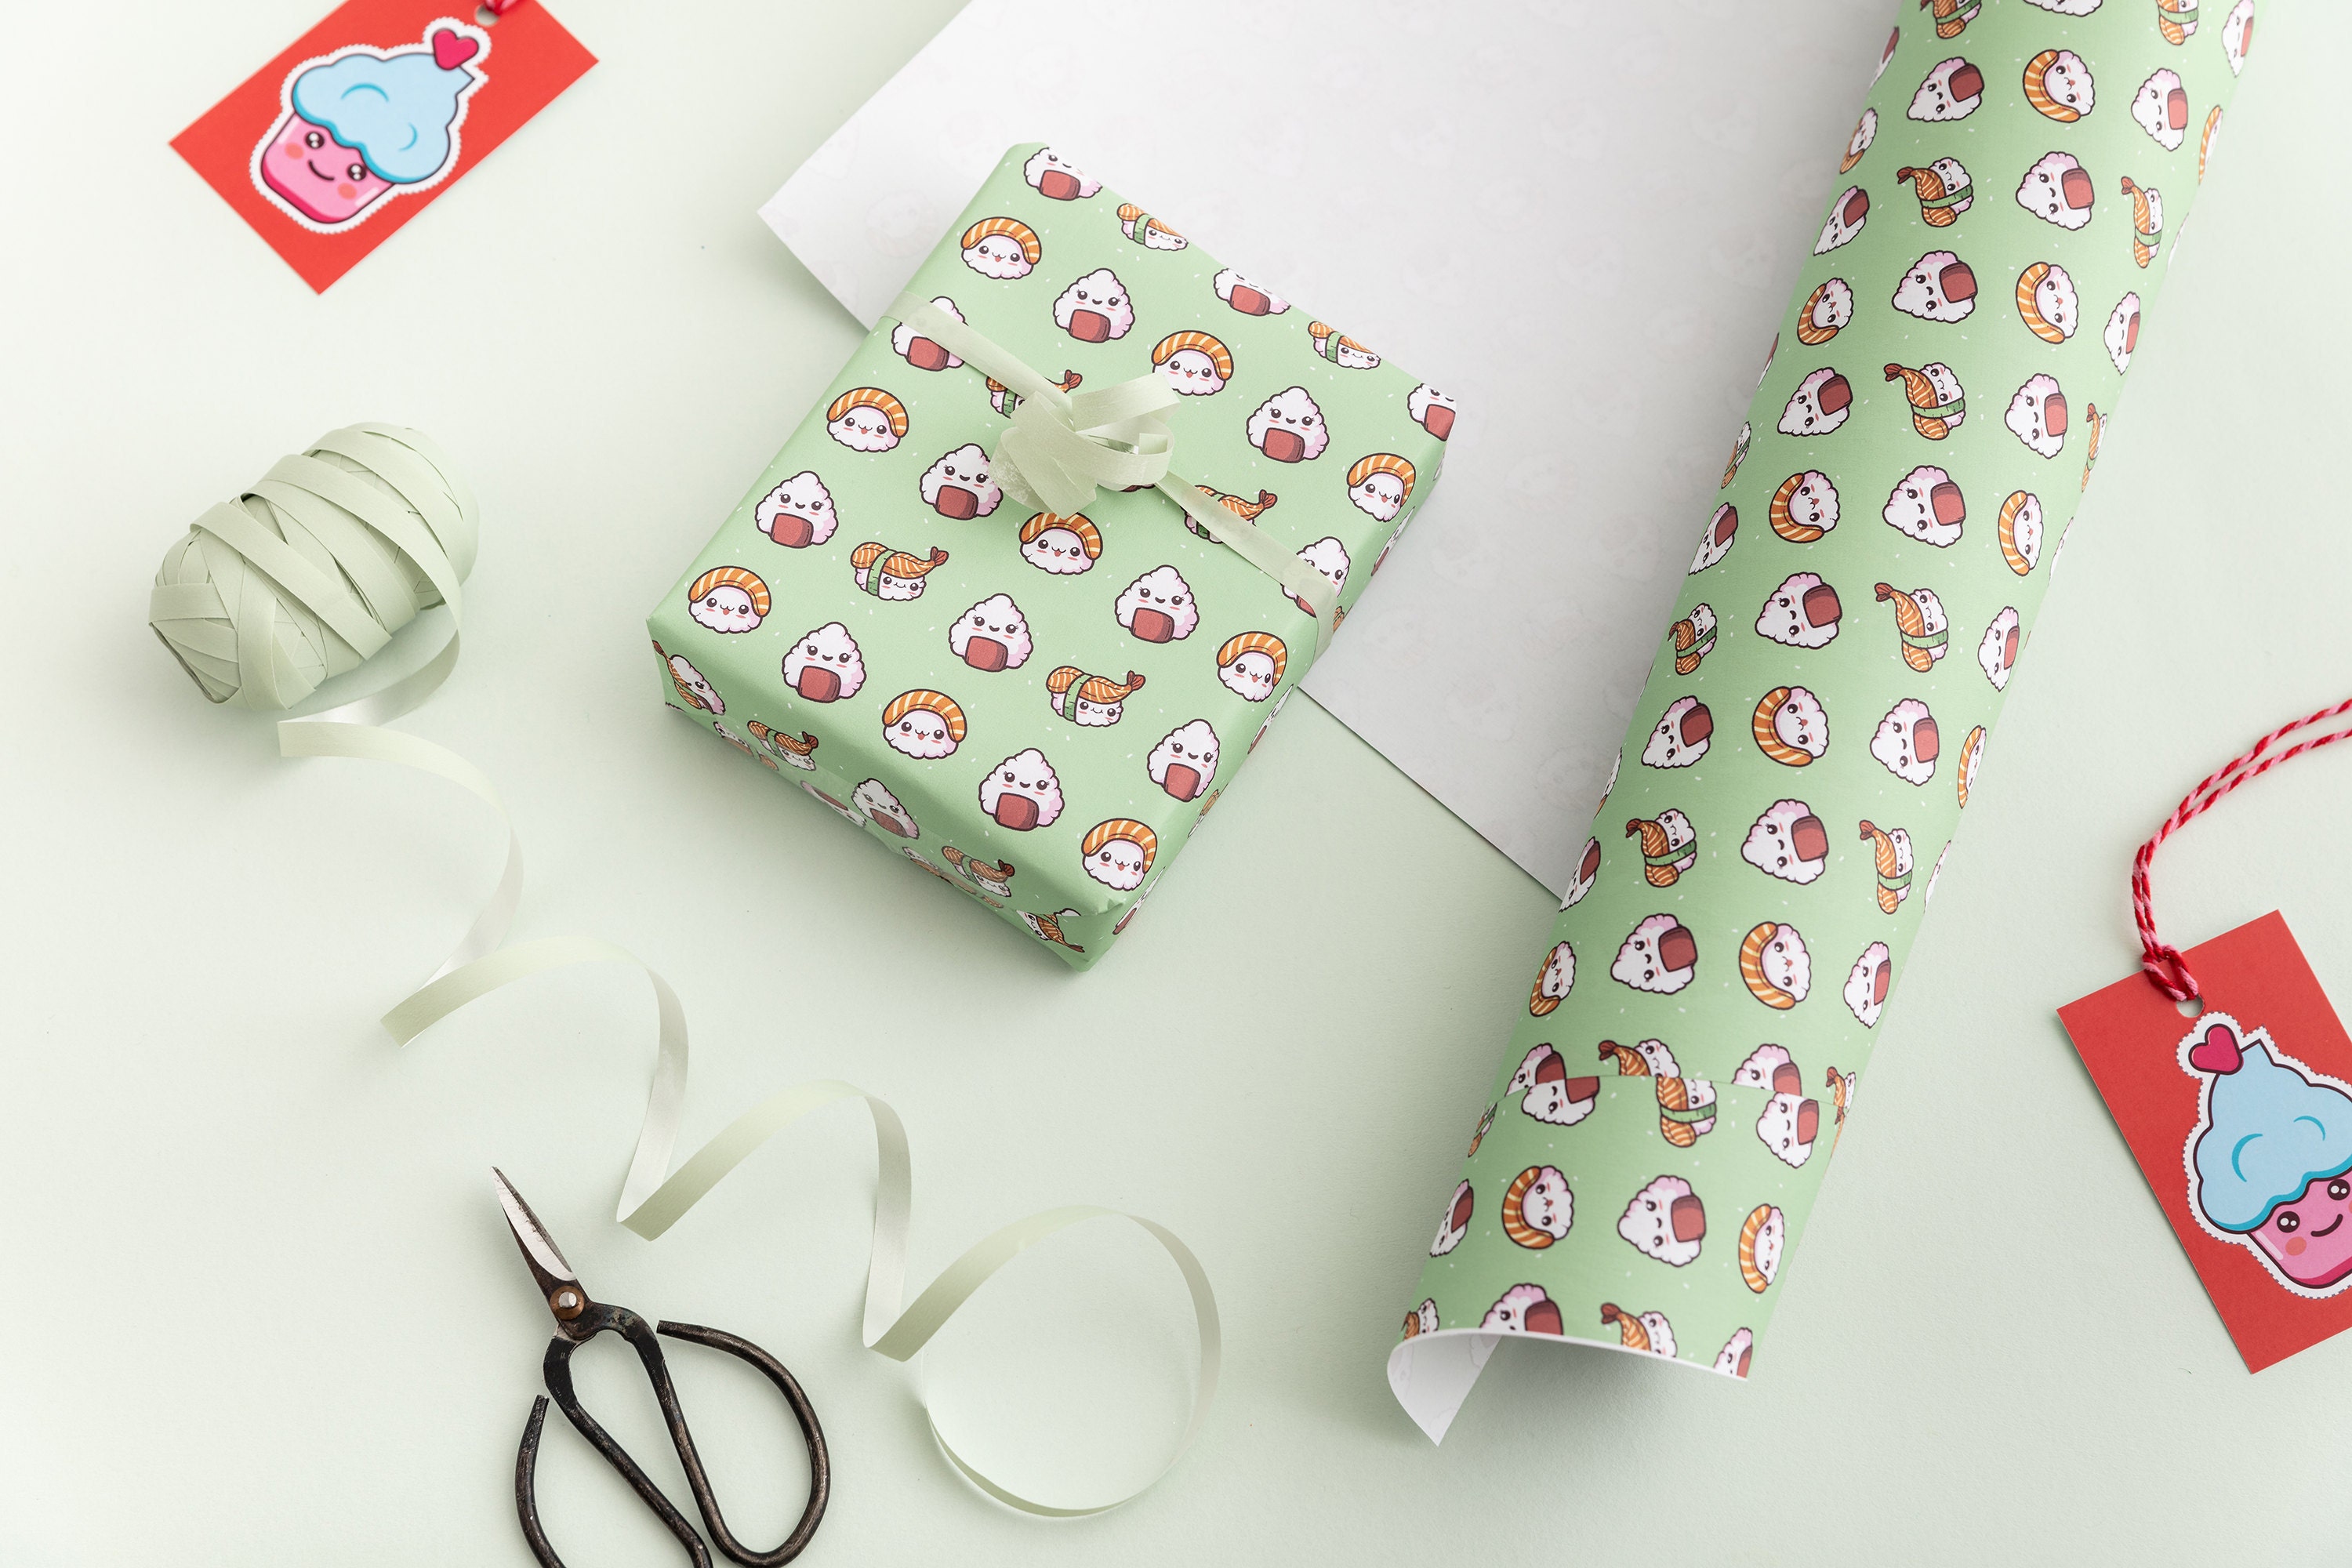 Sumo Wrapping Paper / Gift Wrap / Kawaii Wrapping Paper / Japanese Wrapping  Paper/ Birthday Gift Wrap / Recyclable Paper / Occasion Wrap 